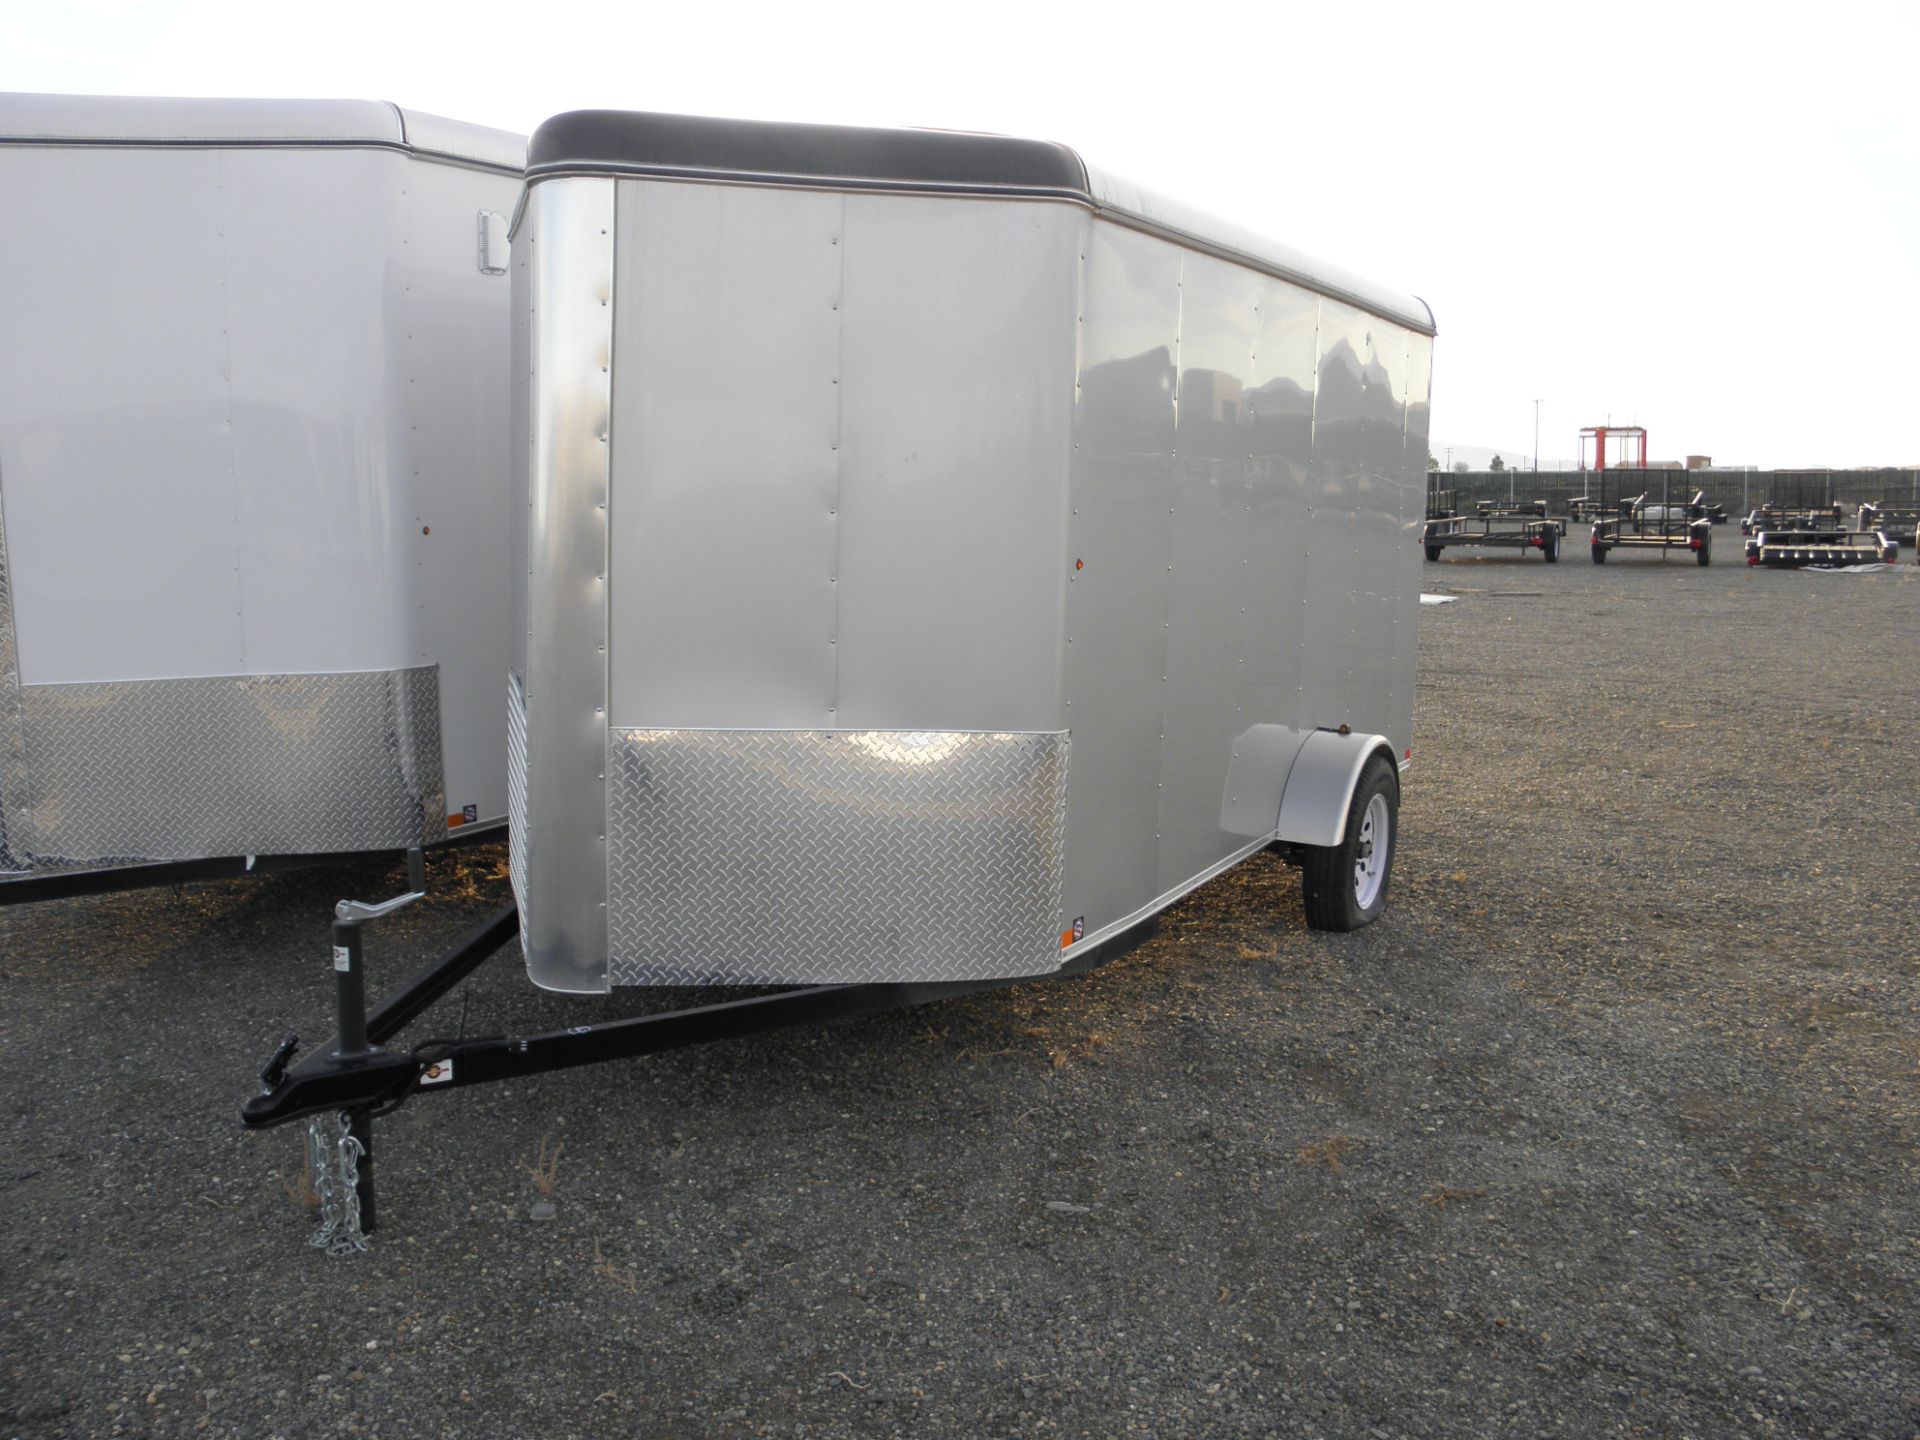 6' X 12' single axle enclosed cargo, fold down rear door, wood lined, V nose, silver